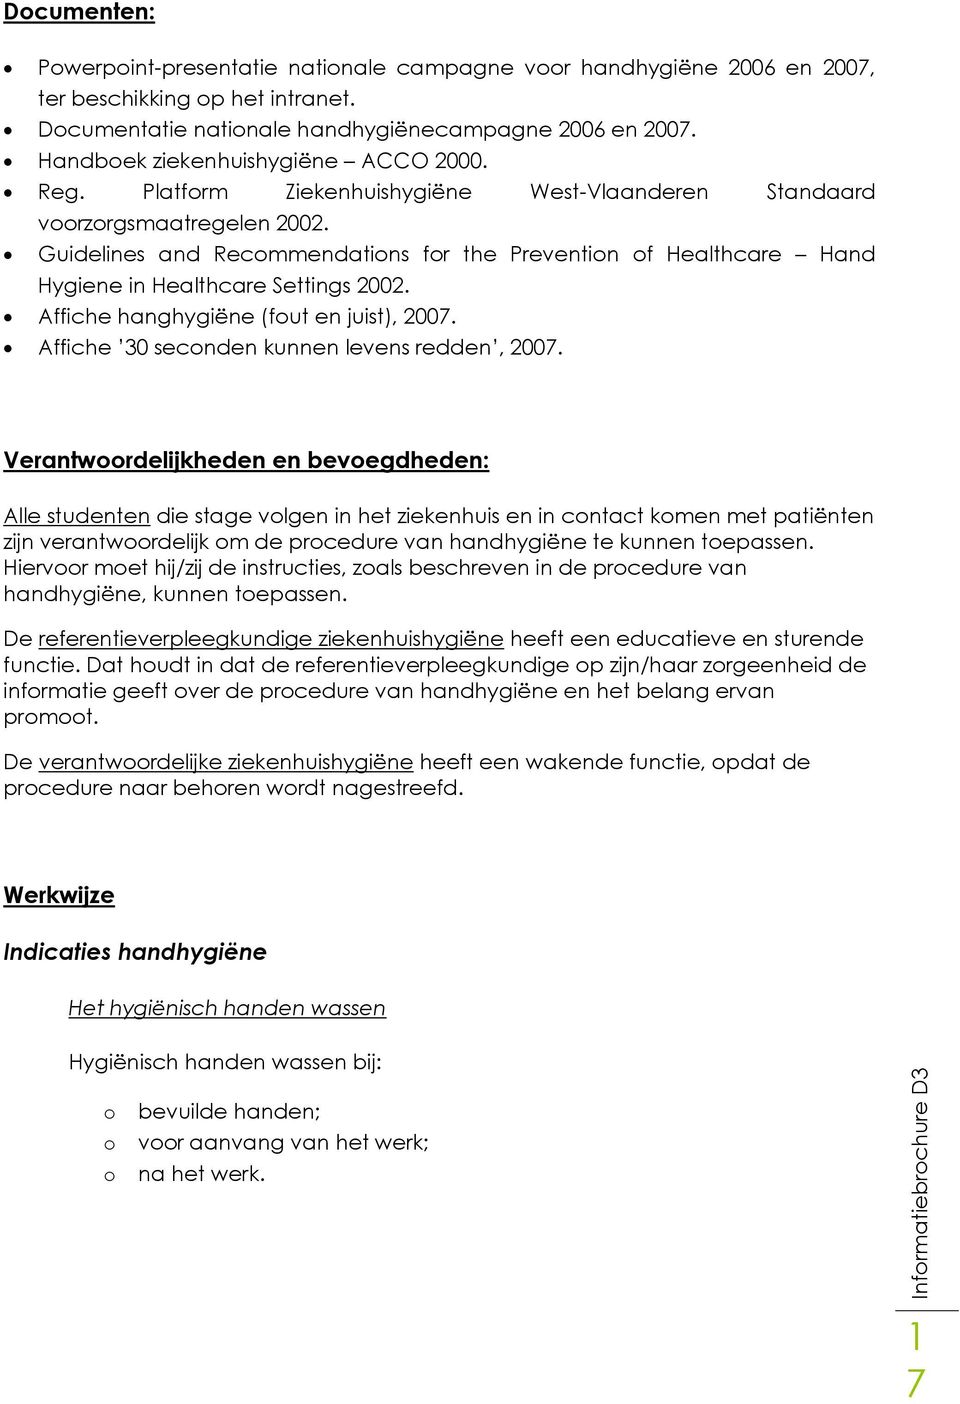 Guidelines and Recommendations for the Prevention of Healthcare Hand Hygiene in Healthcare Settings 2002. Affiche hanghygiëne (fout en juist), 2007. Affiche 30 seconden kunnen levens redden, 2007.